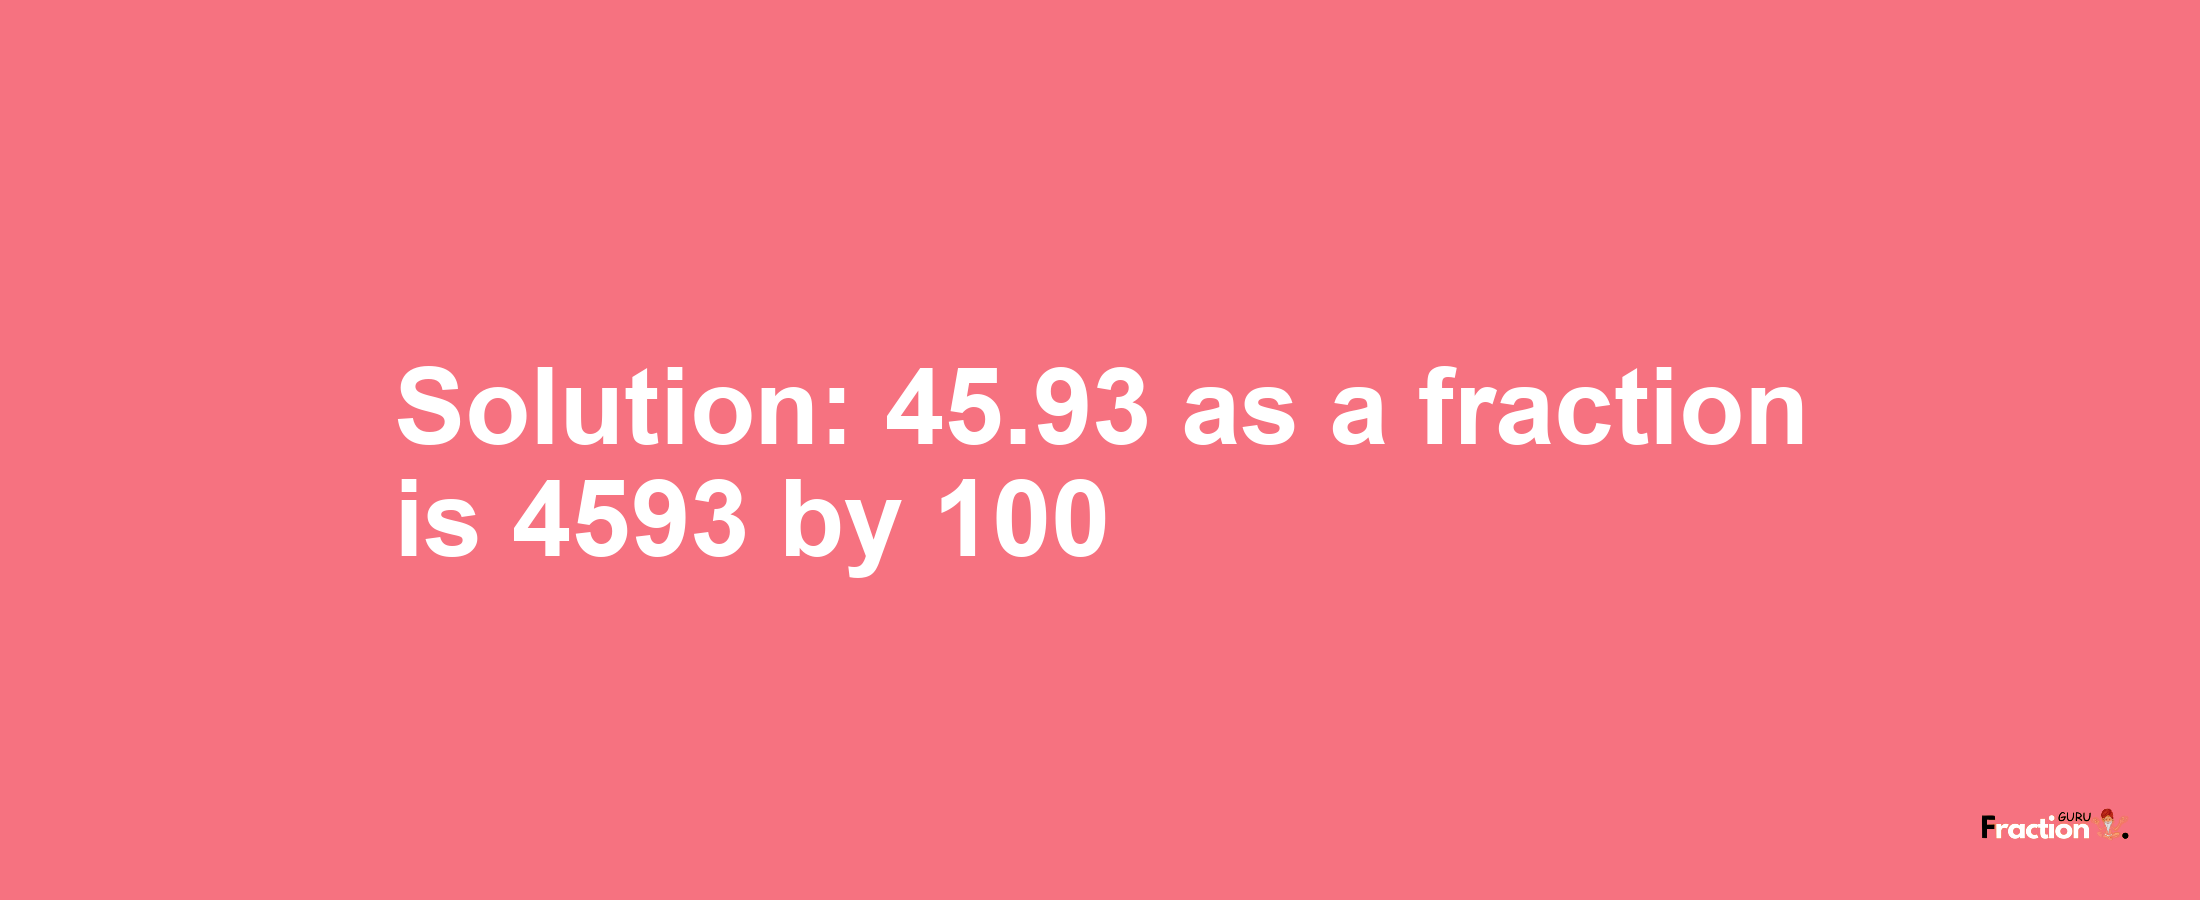 Solution:45.93 as a fraction is 4593/100